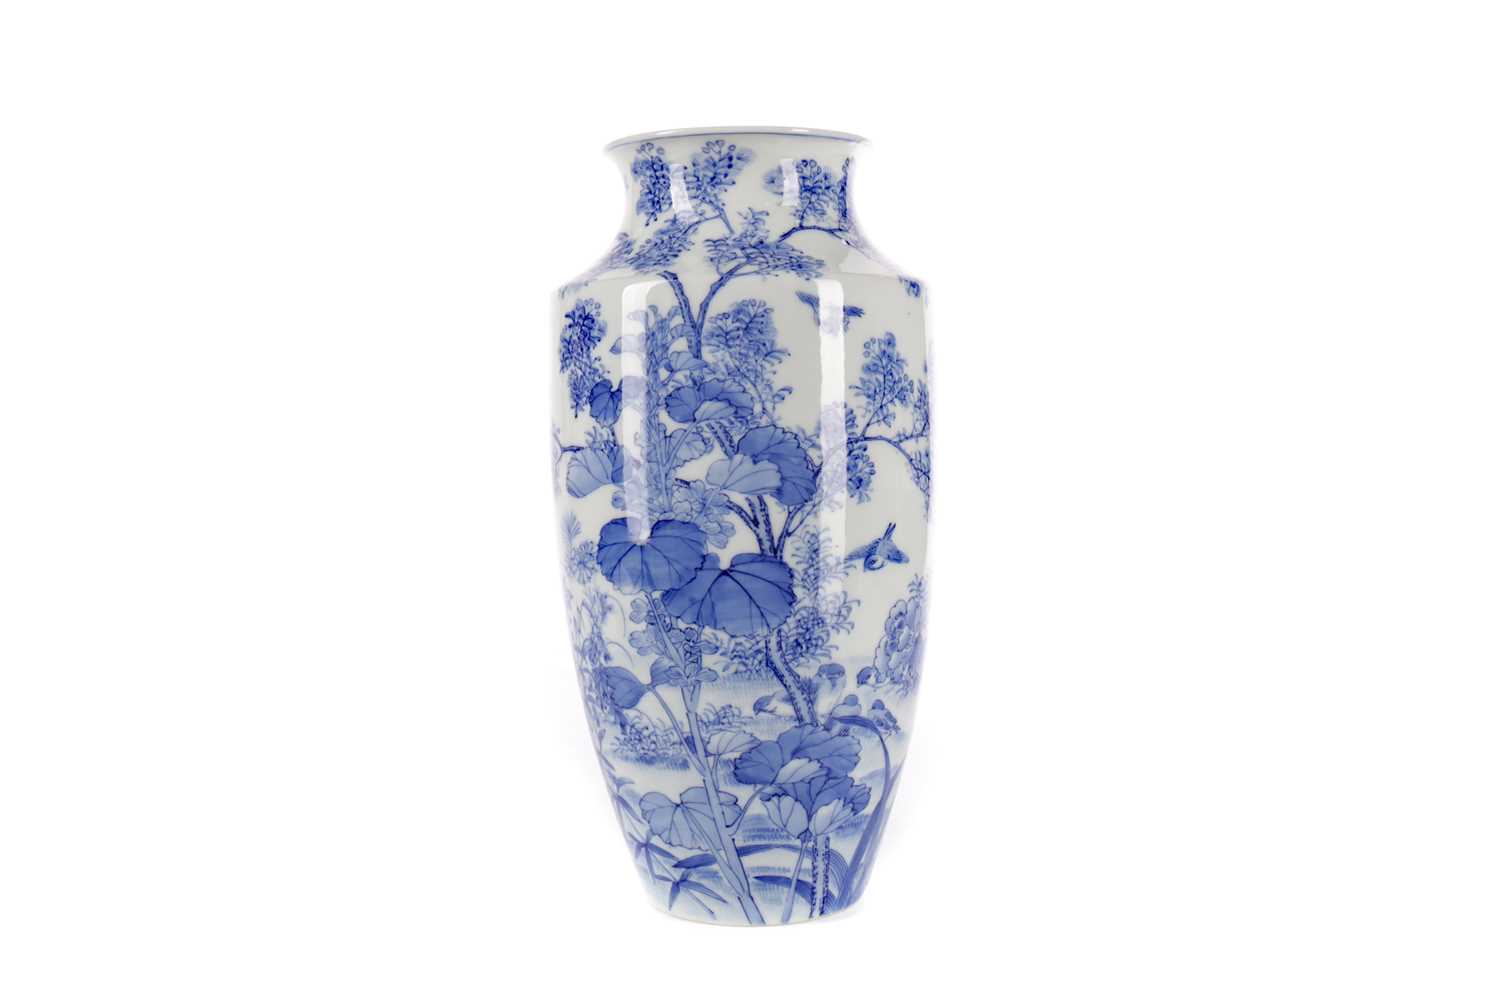 Lot 810 - AN EARLY 20TH CENTURY JAPANESE ARITA BLUE AND WHITE VASE